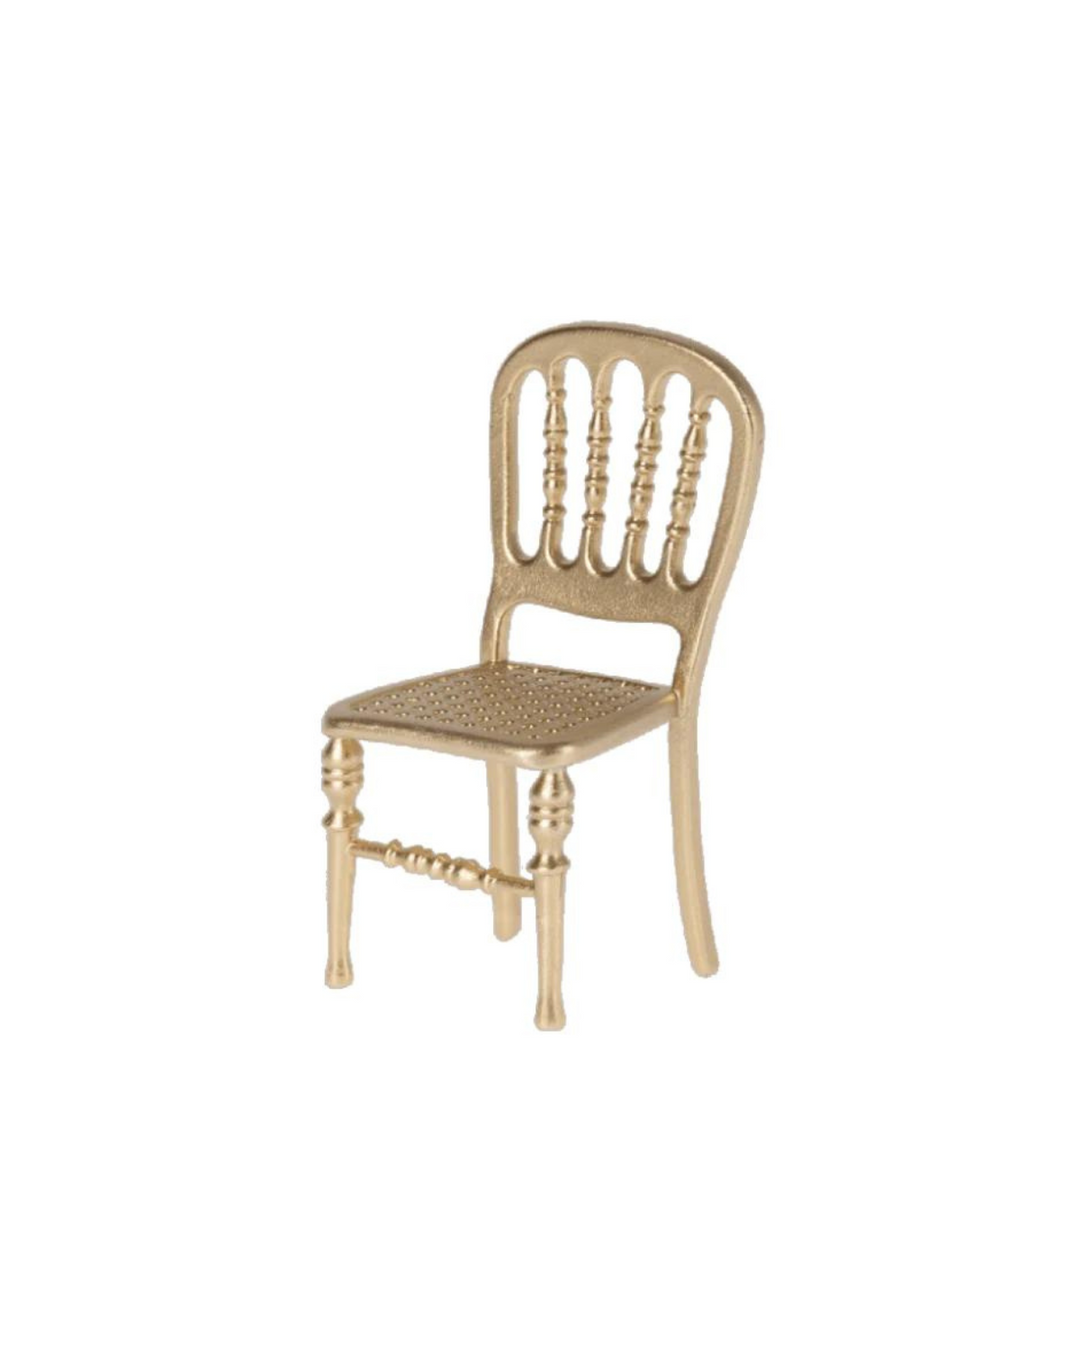 Maileg Gold Chair for Mouse - Charming Dollhouse Furniture